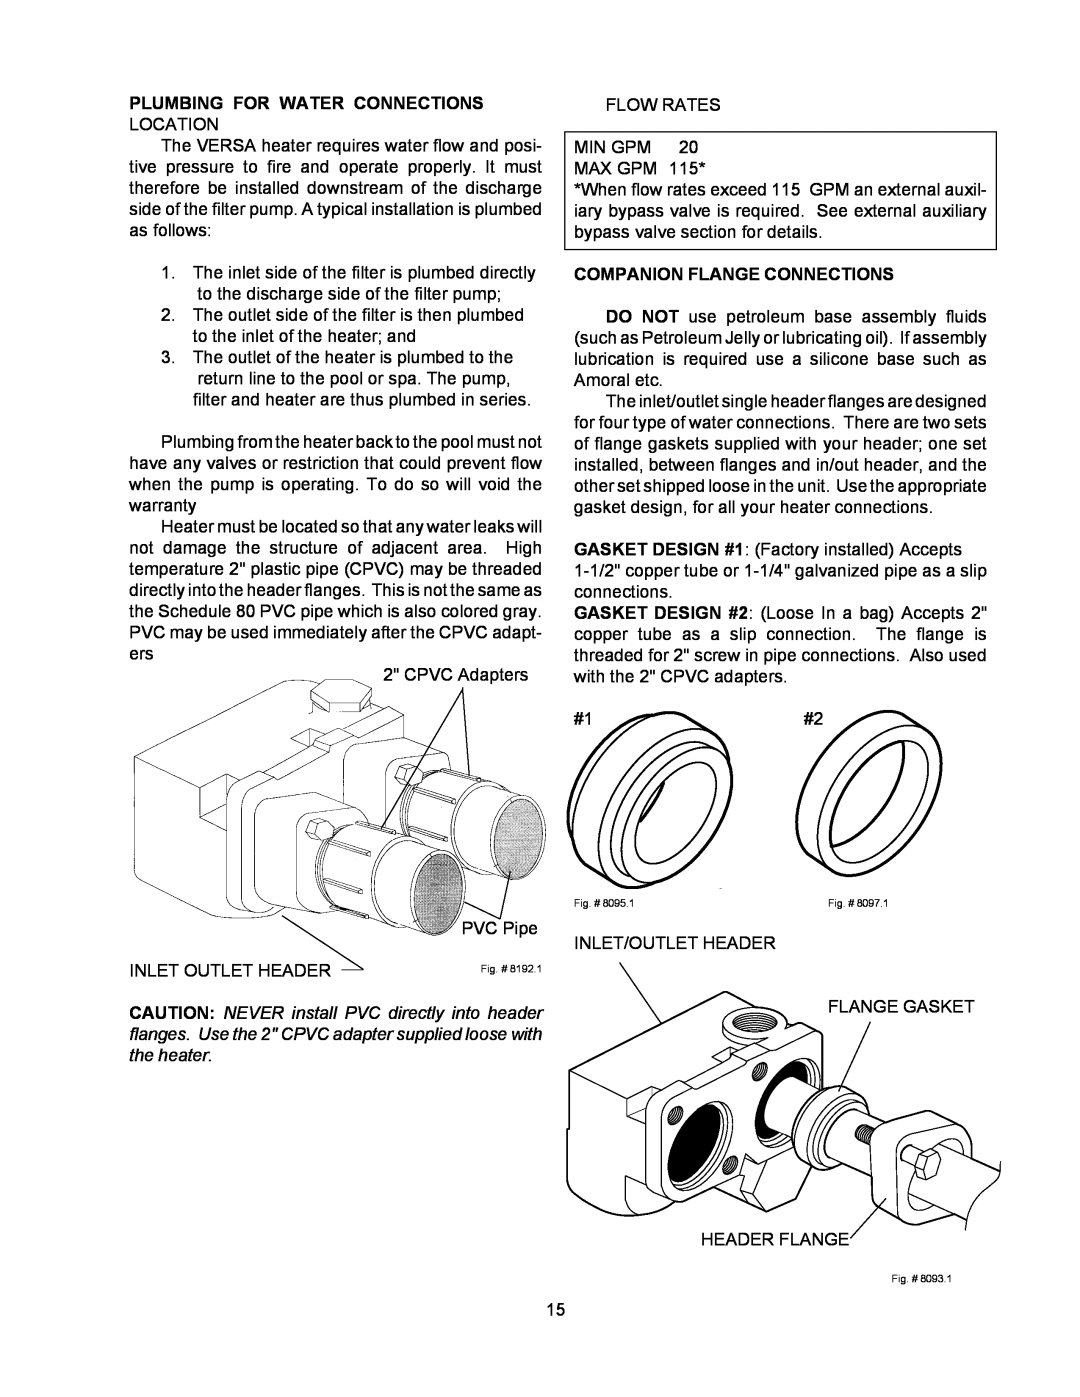 Raypak 155C installation instructions Plumbing For Water Connections Location, Companion Flange Connections, the heater 